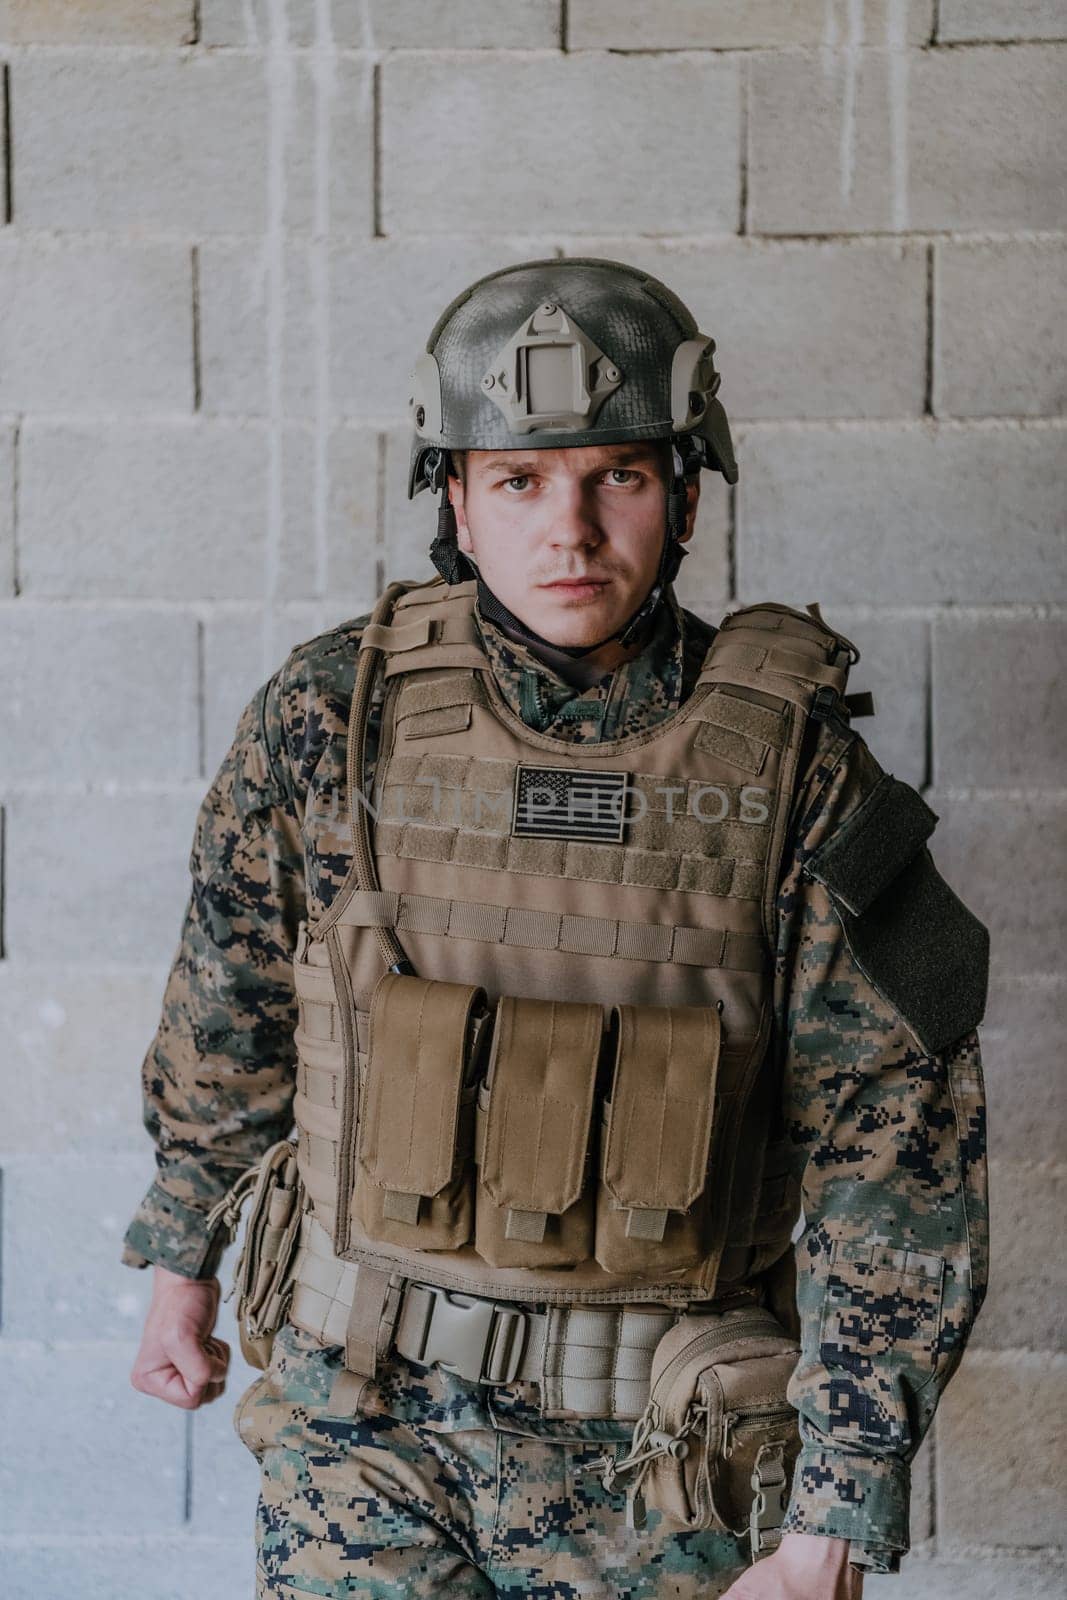 Soldier preparing tactical protective and communication gear for action battle.